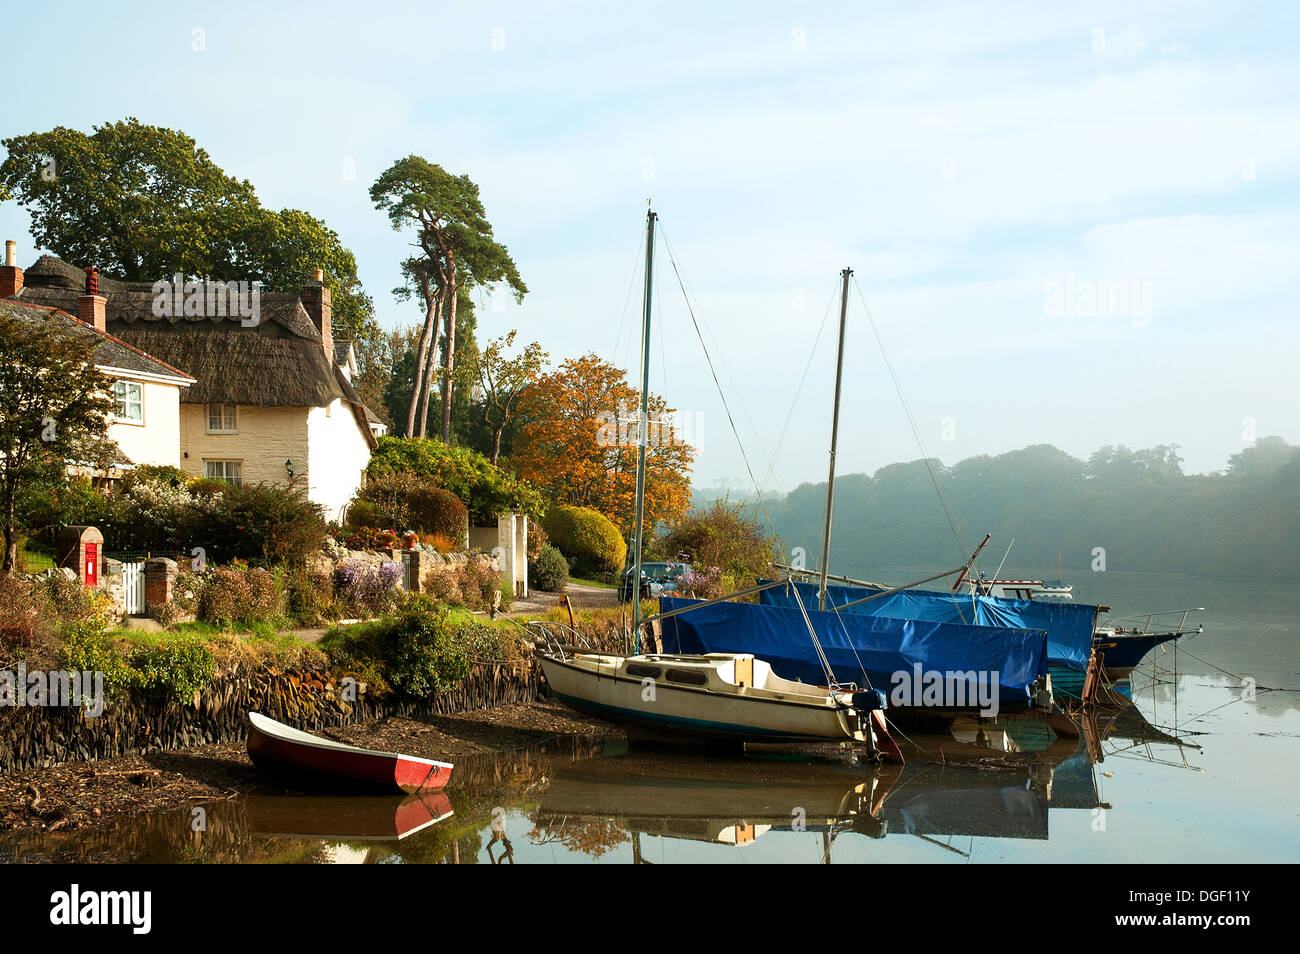 The hamlet of St.Clement on the Tresillian river near Truro in Cornwall, UK Stock Photo